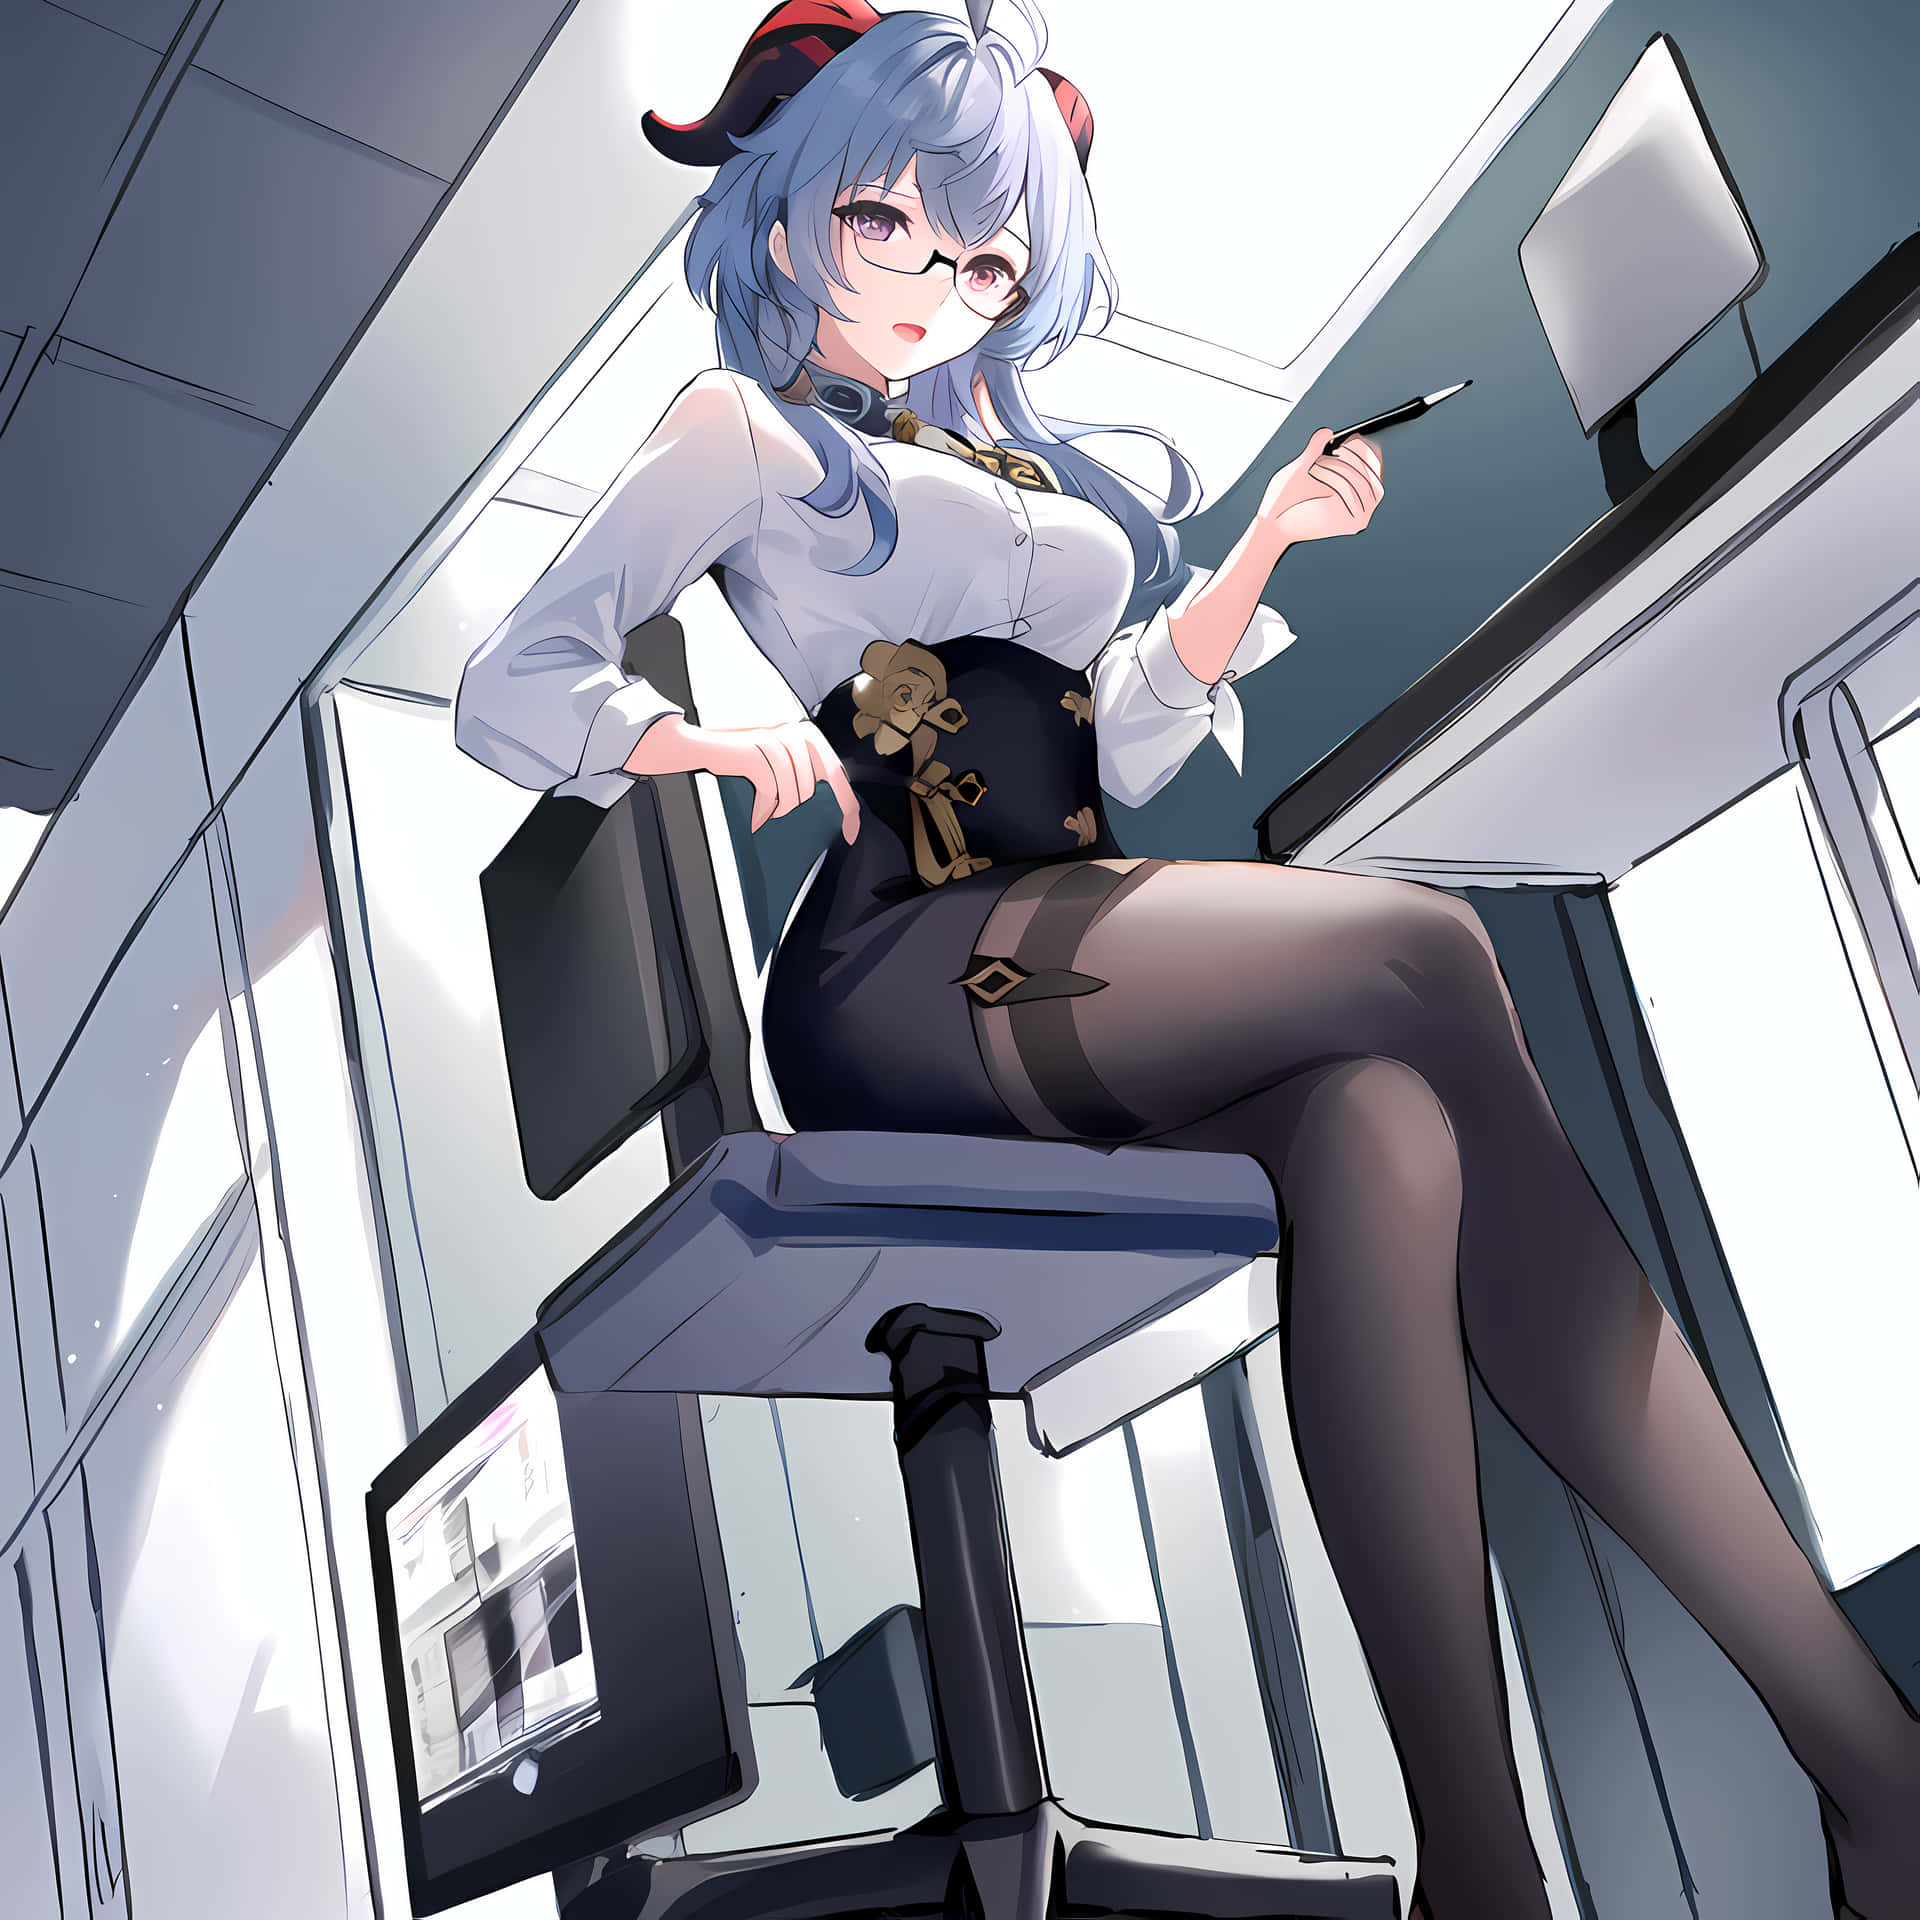 Download Anime Office Girl With Thigh Stockings Wallpaper 